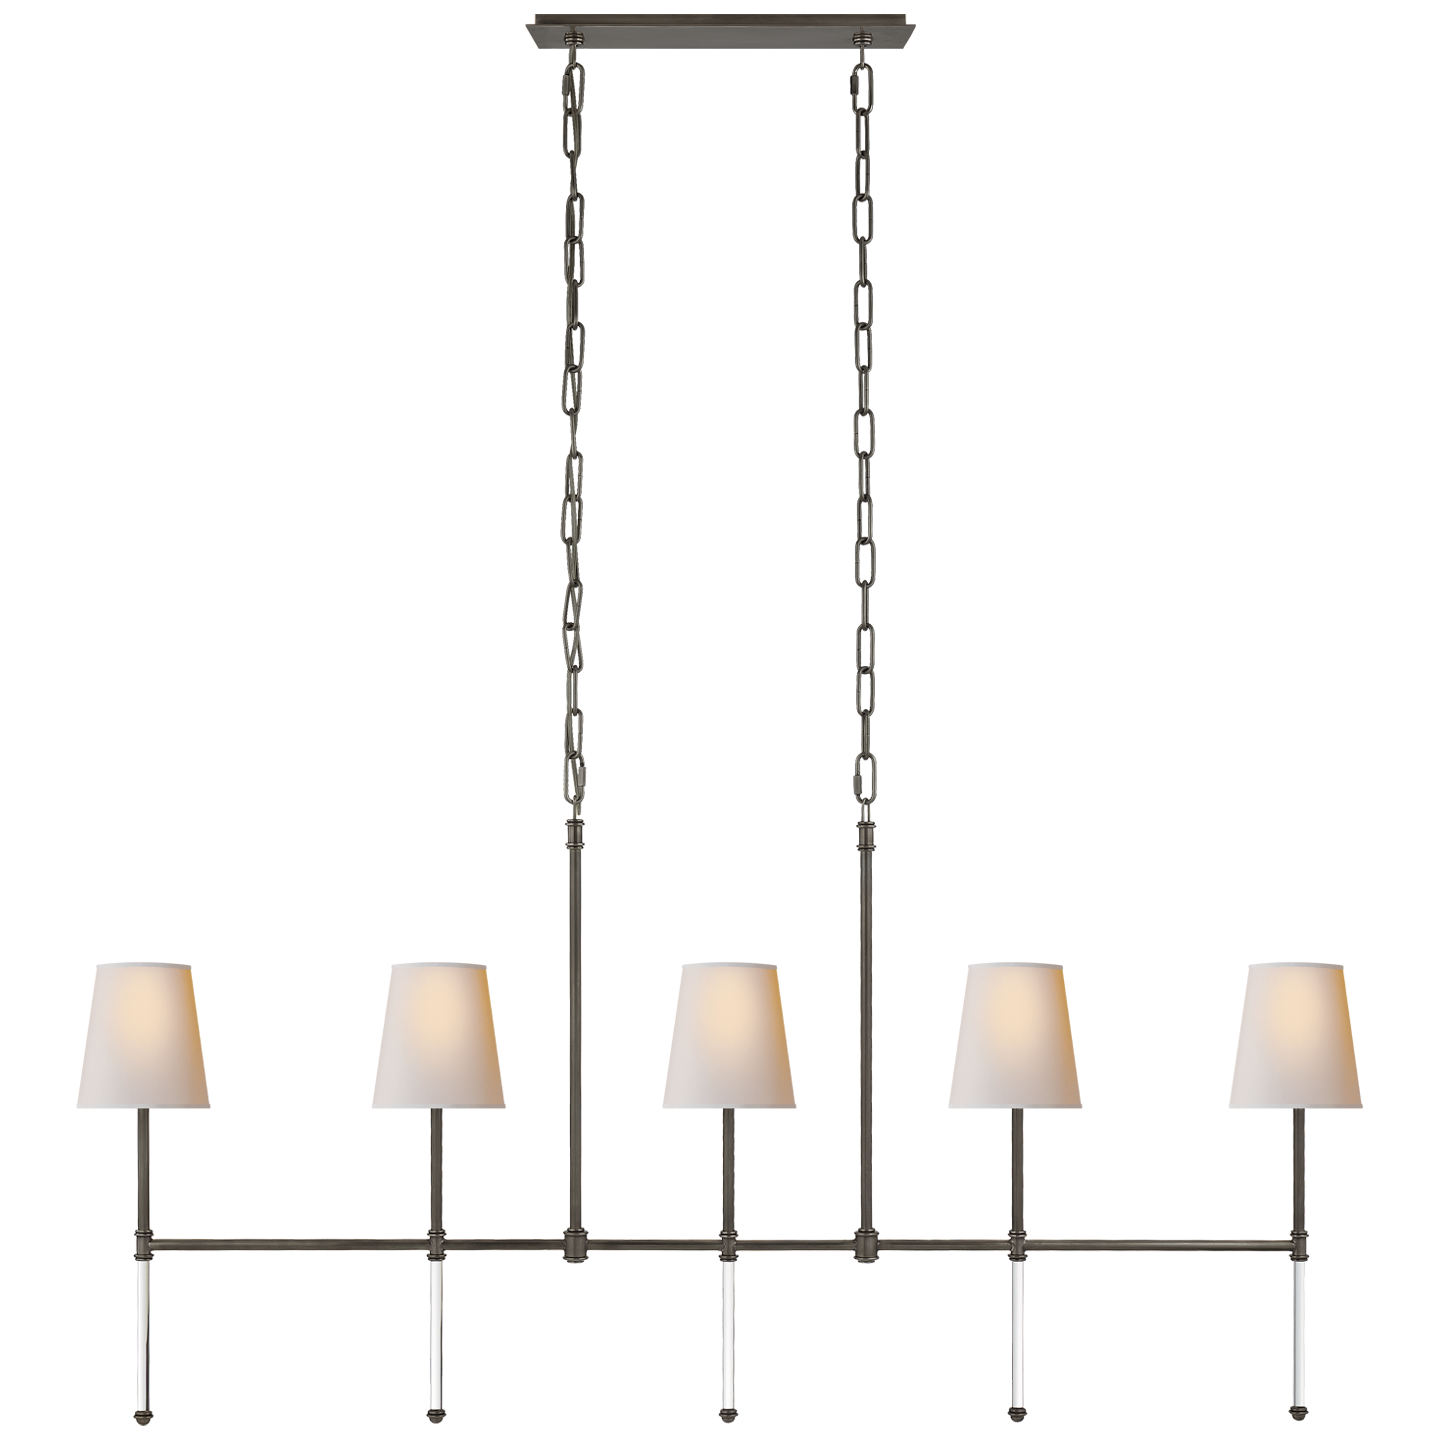 We love the slim, gorgeous arms of this Camille Medium Linear Chandelier by Visual Comfort. Place over an island or dining room to give your space a warm, elegant look  Designer: Suzanne Kasler